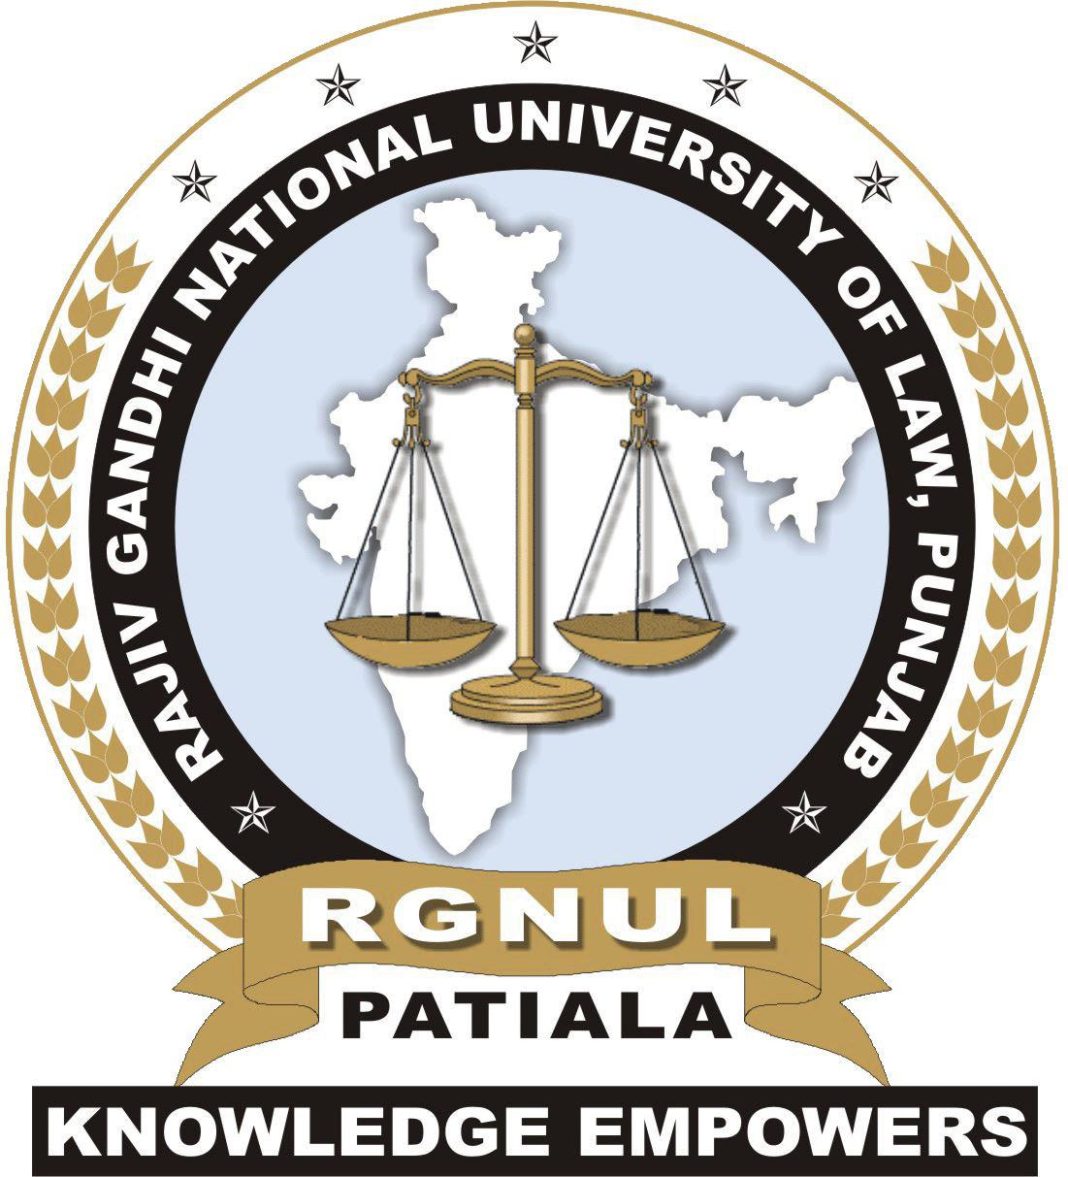 Call for Papers: Review of Alternative Dispute Resolution by CADR, RGNUL, Volume 1